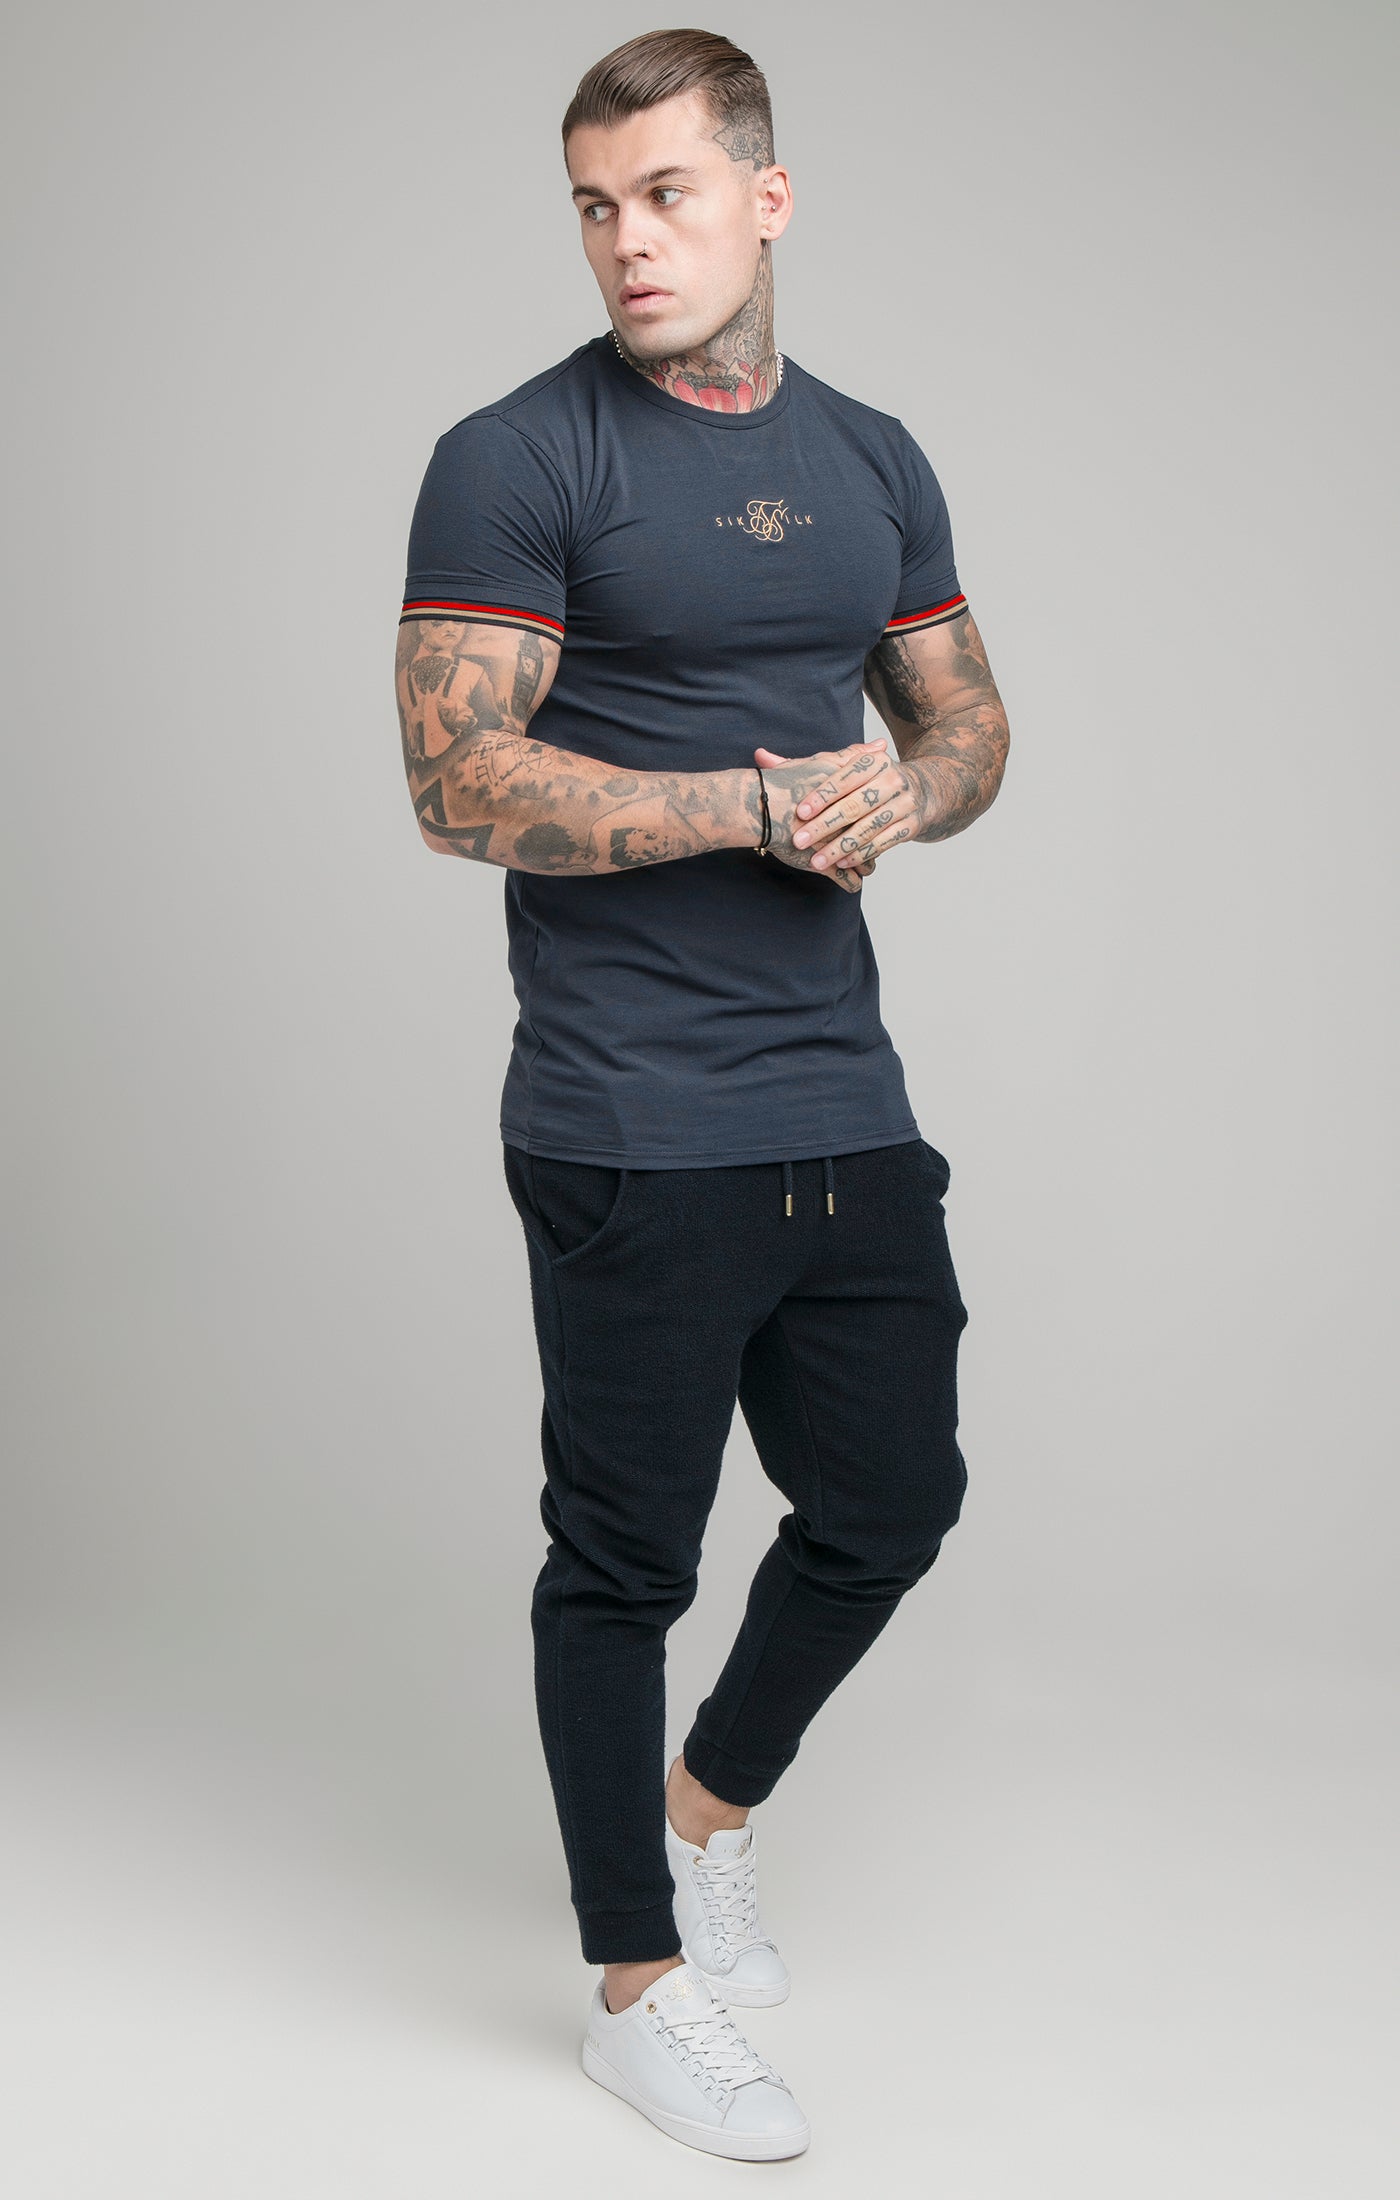 Load image into Gallery viewer, SikSilk Reign Tech Tee - Navy (3)